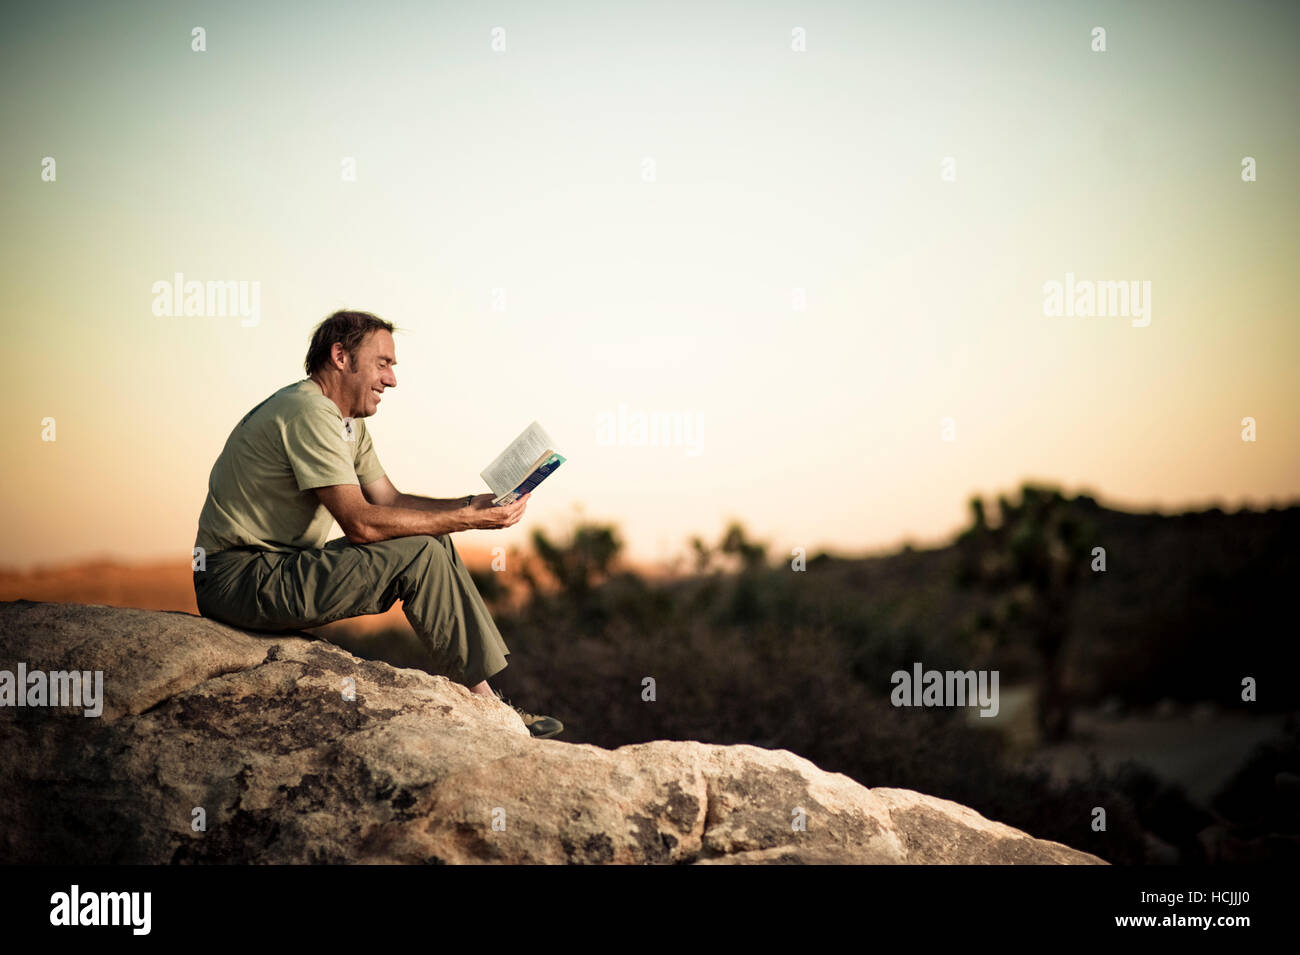 Roy Smith relaxes  with a good book atop a boulder in Joshua Tree, California at sunset. Stock Photo